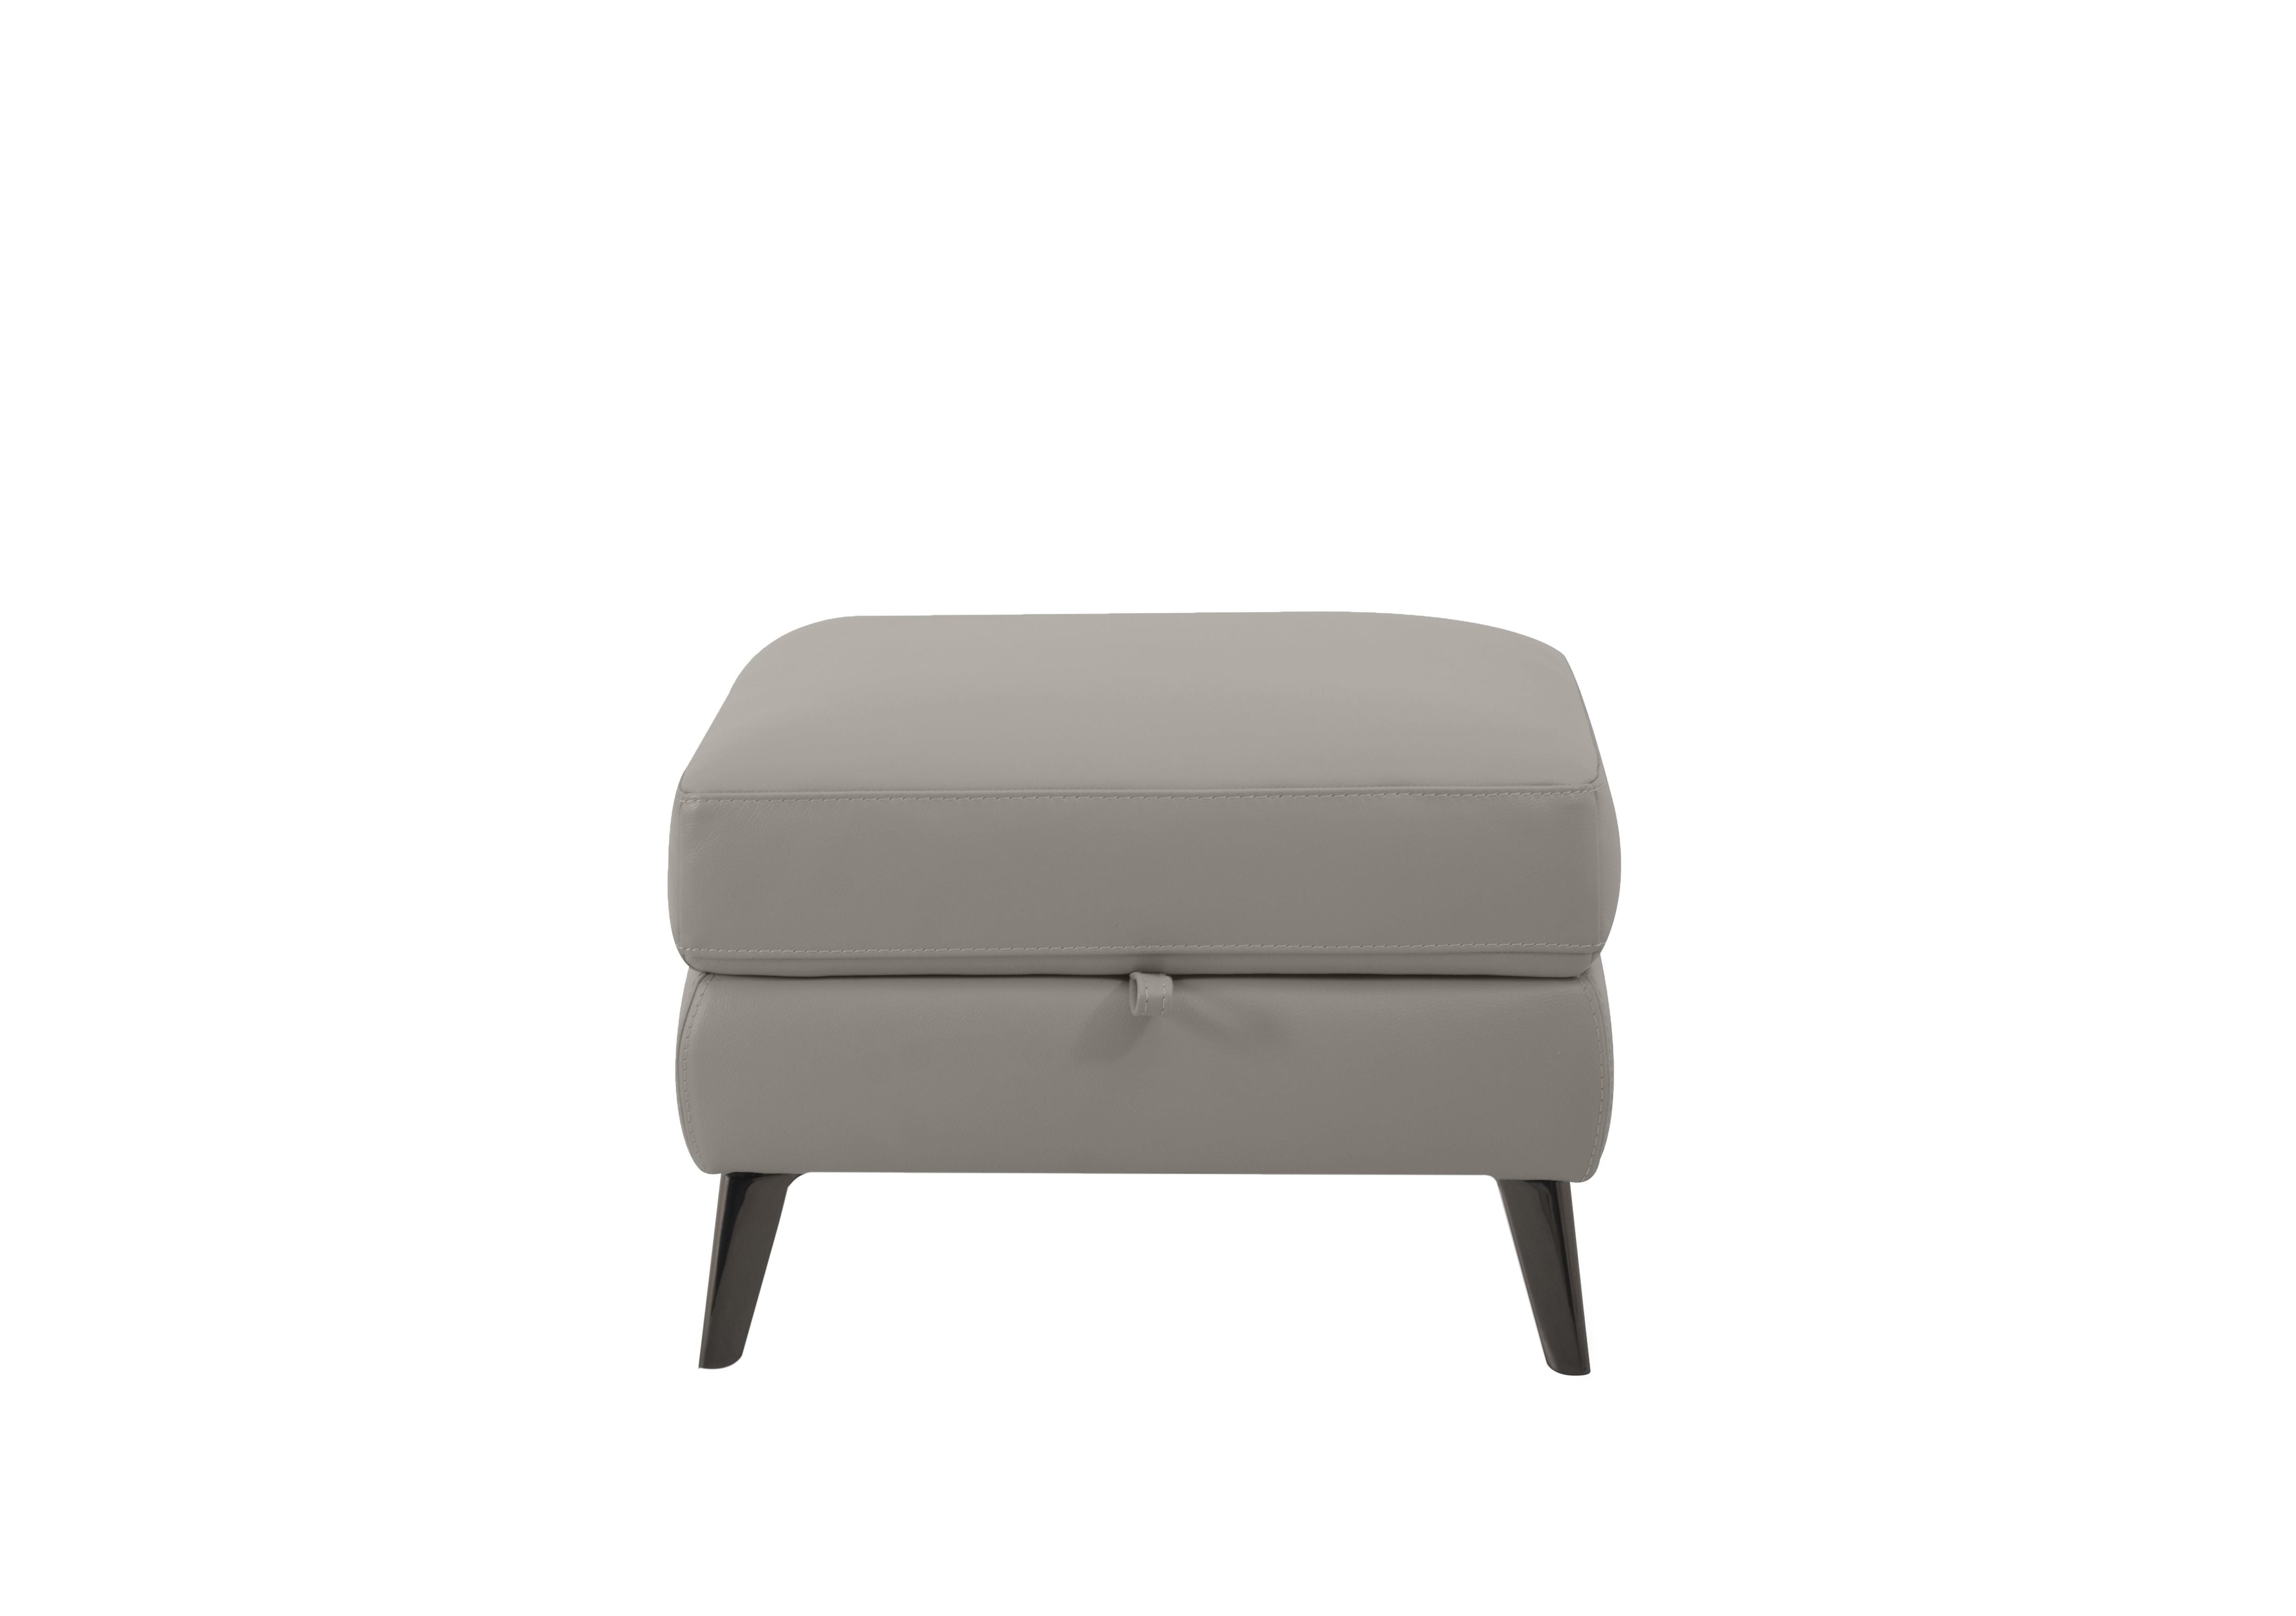 Axel Leather Storage Footstool in Bv-946b Silver Grey on Furniture Village